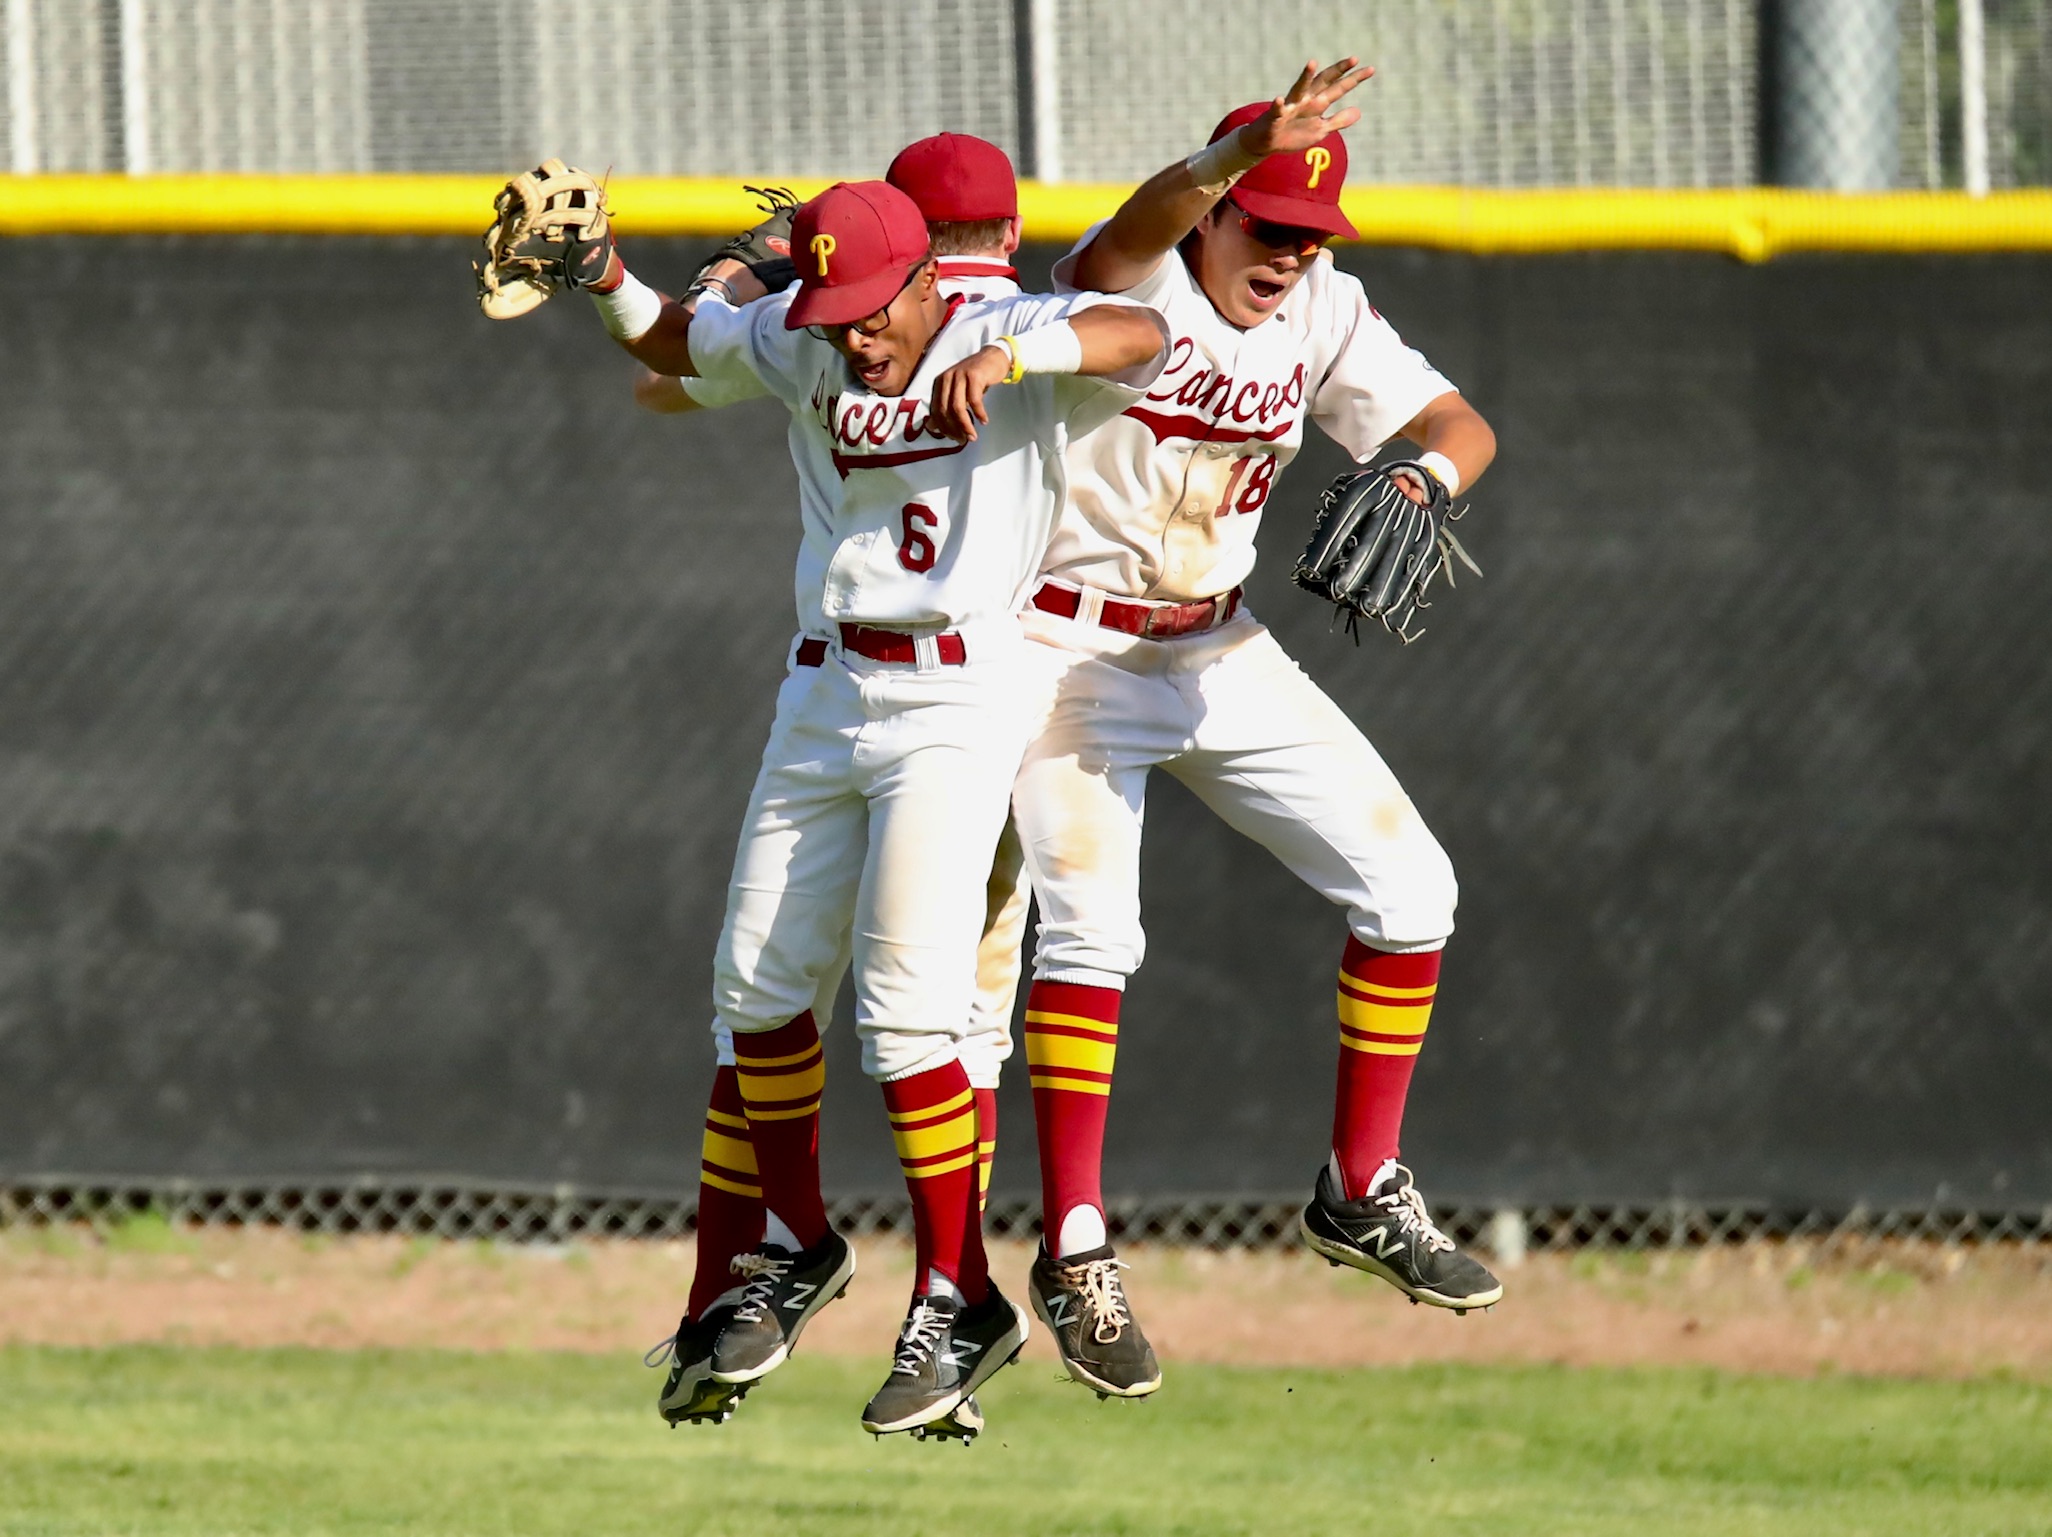 PCC's outfield of Aryonis Harrison (#6), Jakob Guardado (right) and Max Blessinger do a celebratory leap bump as the Lancers won their ninth straight on Thursday (photo by Michael Watkins, PCC Athletics).